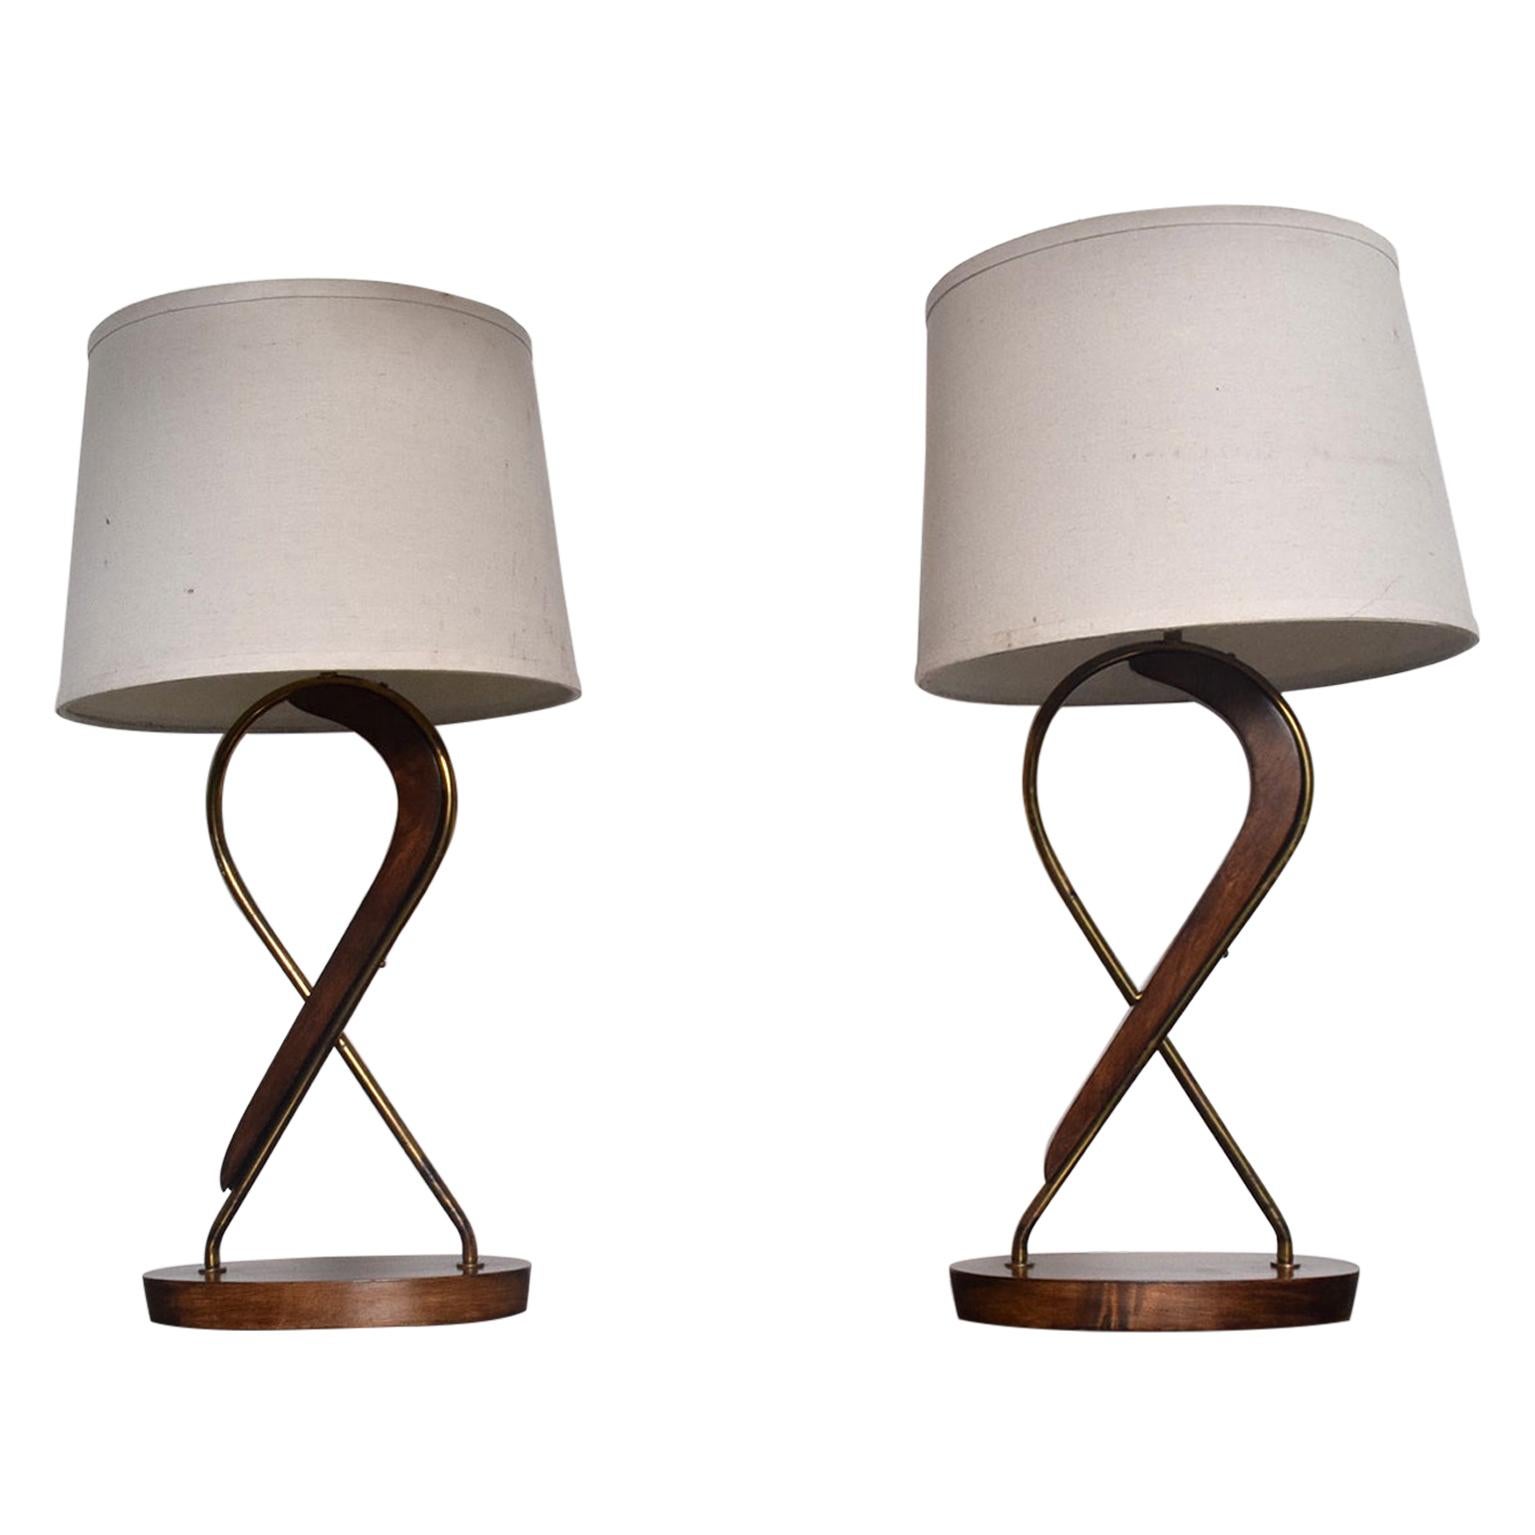 Table Lamps
Pair of mahogany table lamps by Eugenio Escudero Mexico 1950s Mexican Modernism
Sculptural mahogany wood and brass. Swirling organic presentation.
Unmarked.
Lamp shades are not included, for display only.
H 20 in. x W 10.5 in. x D 5